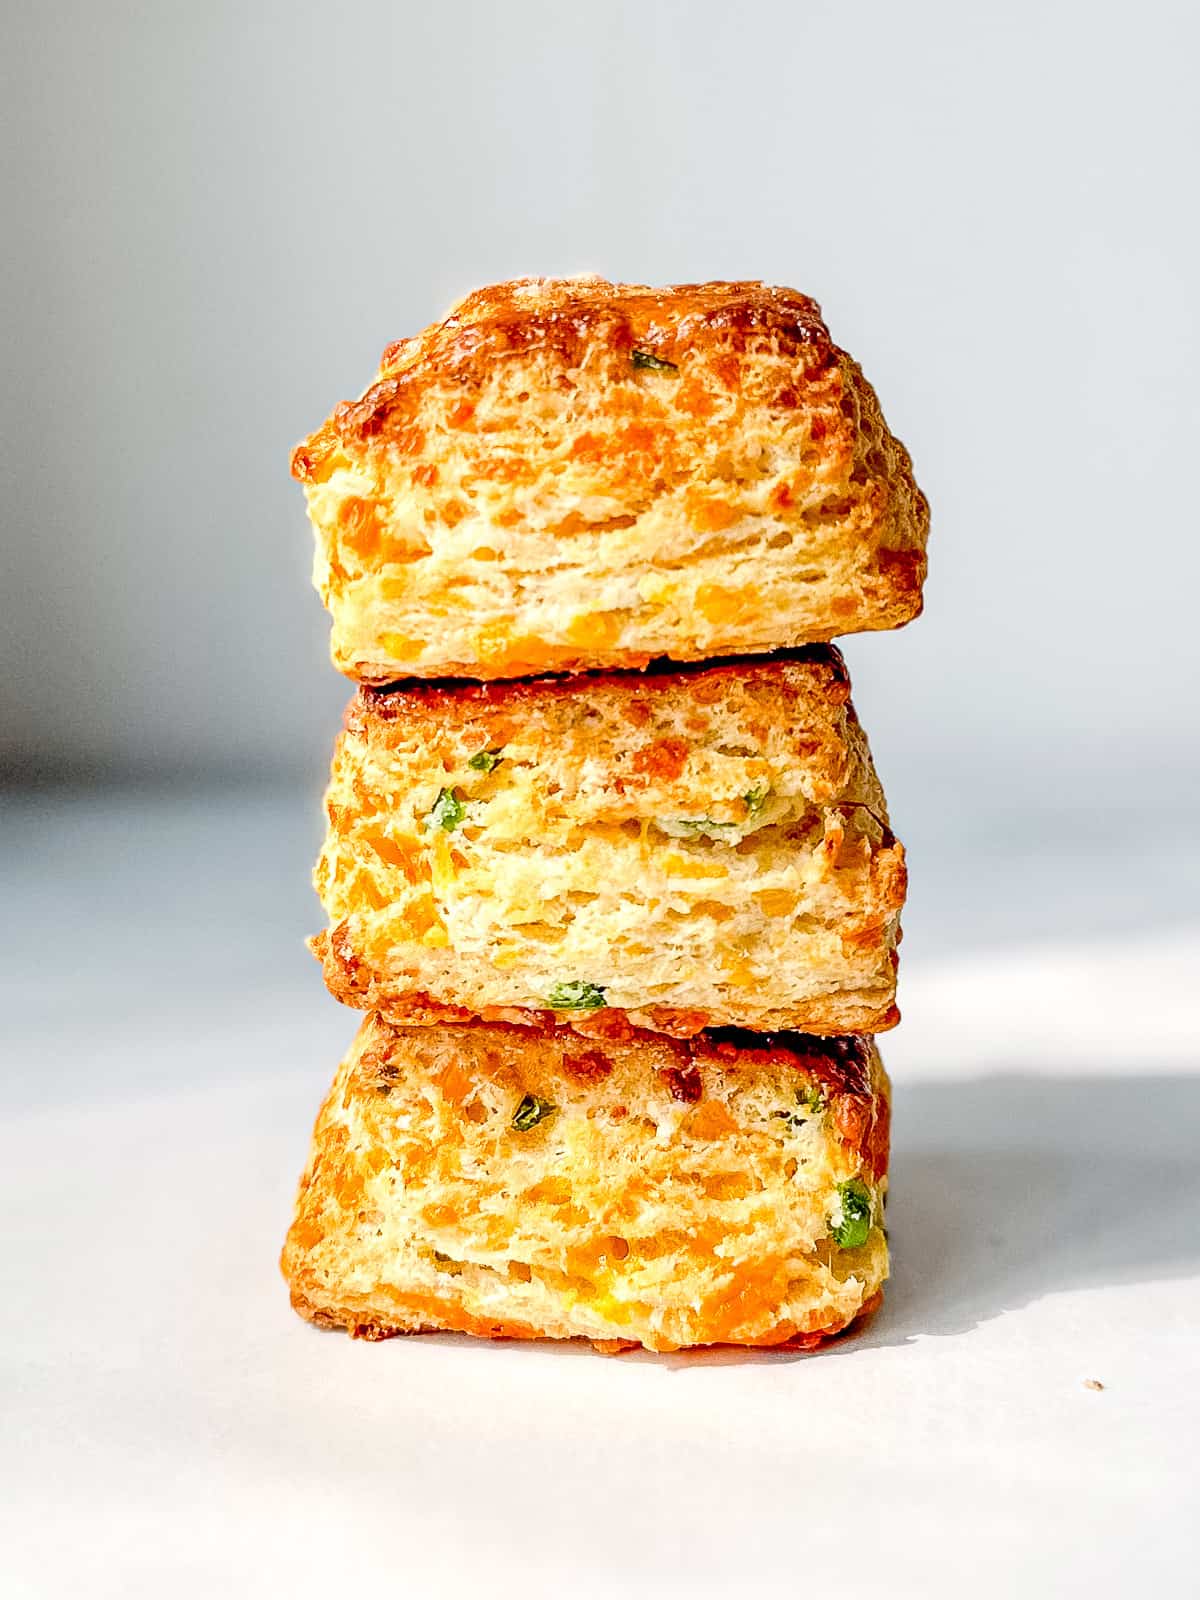 A side view of a stack of jalapeno cheddar biscuits.